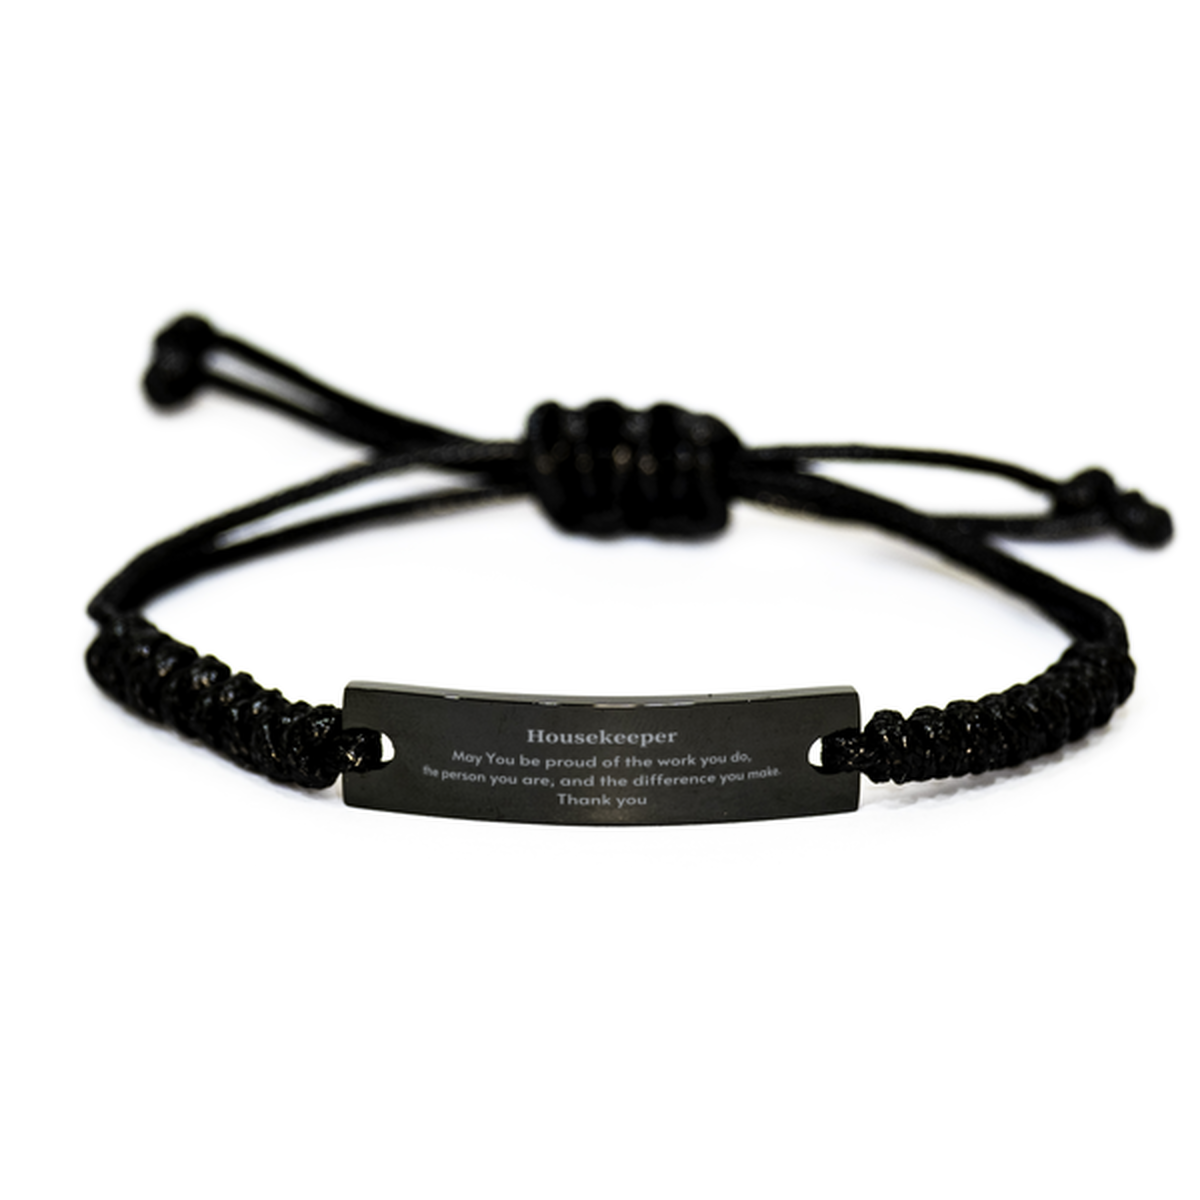 Heartwarming Black Rope Bracelet Retirement Coworkers Gifts for Housekeeper, Housekeeper May You be proud of the work you do, the person you are Gifts for Boss Men Women Friends